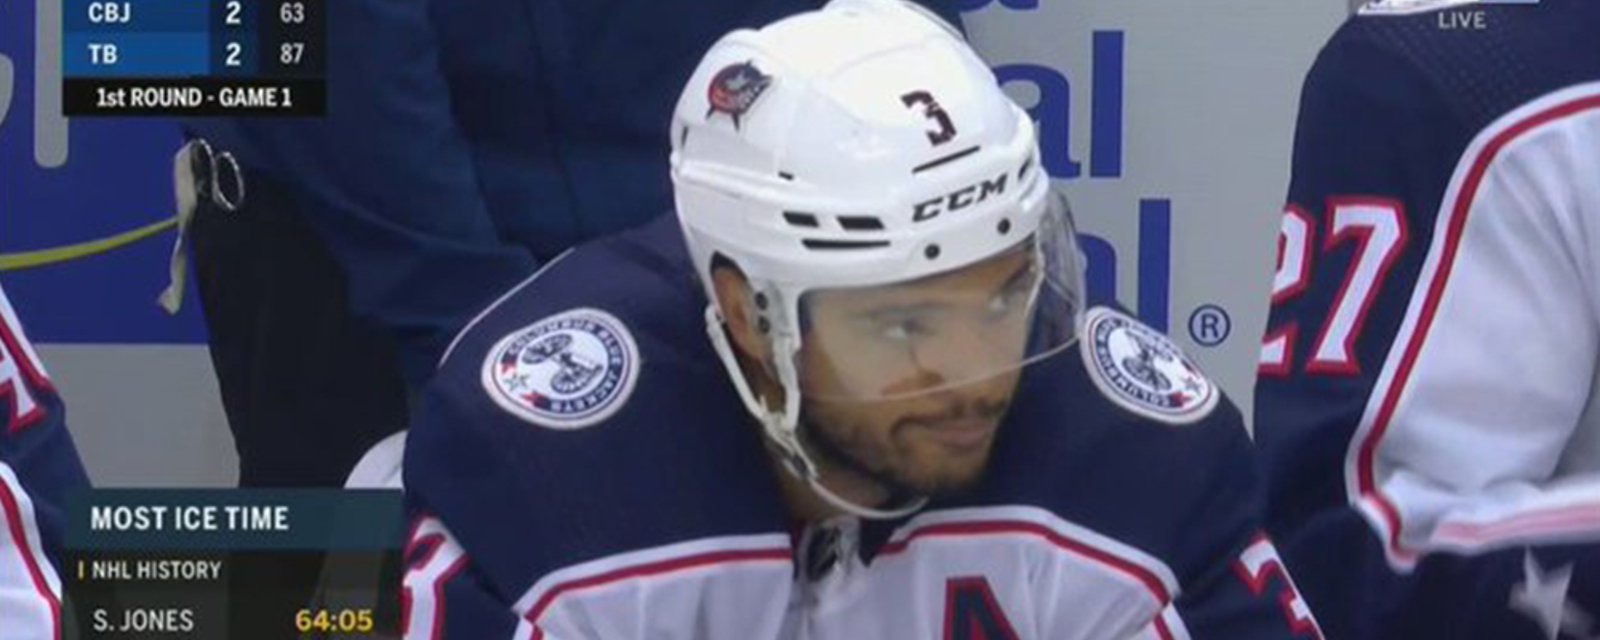 Seth Jones rips referees after non-call on Hedman in OT